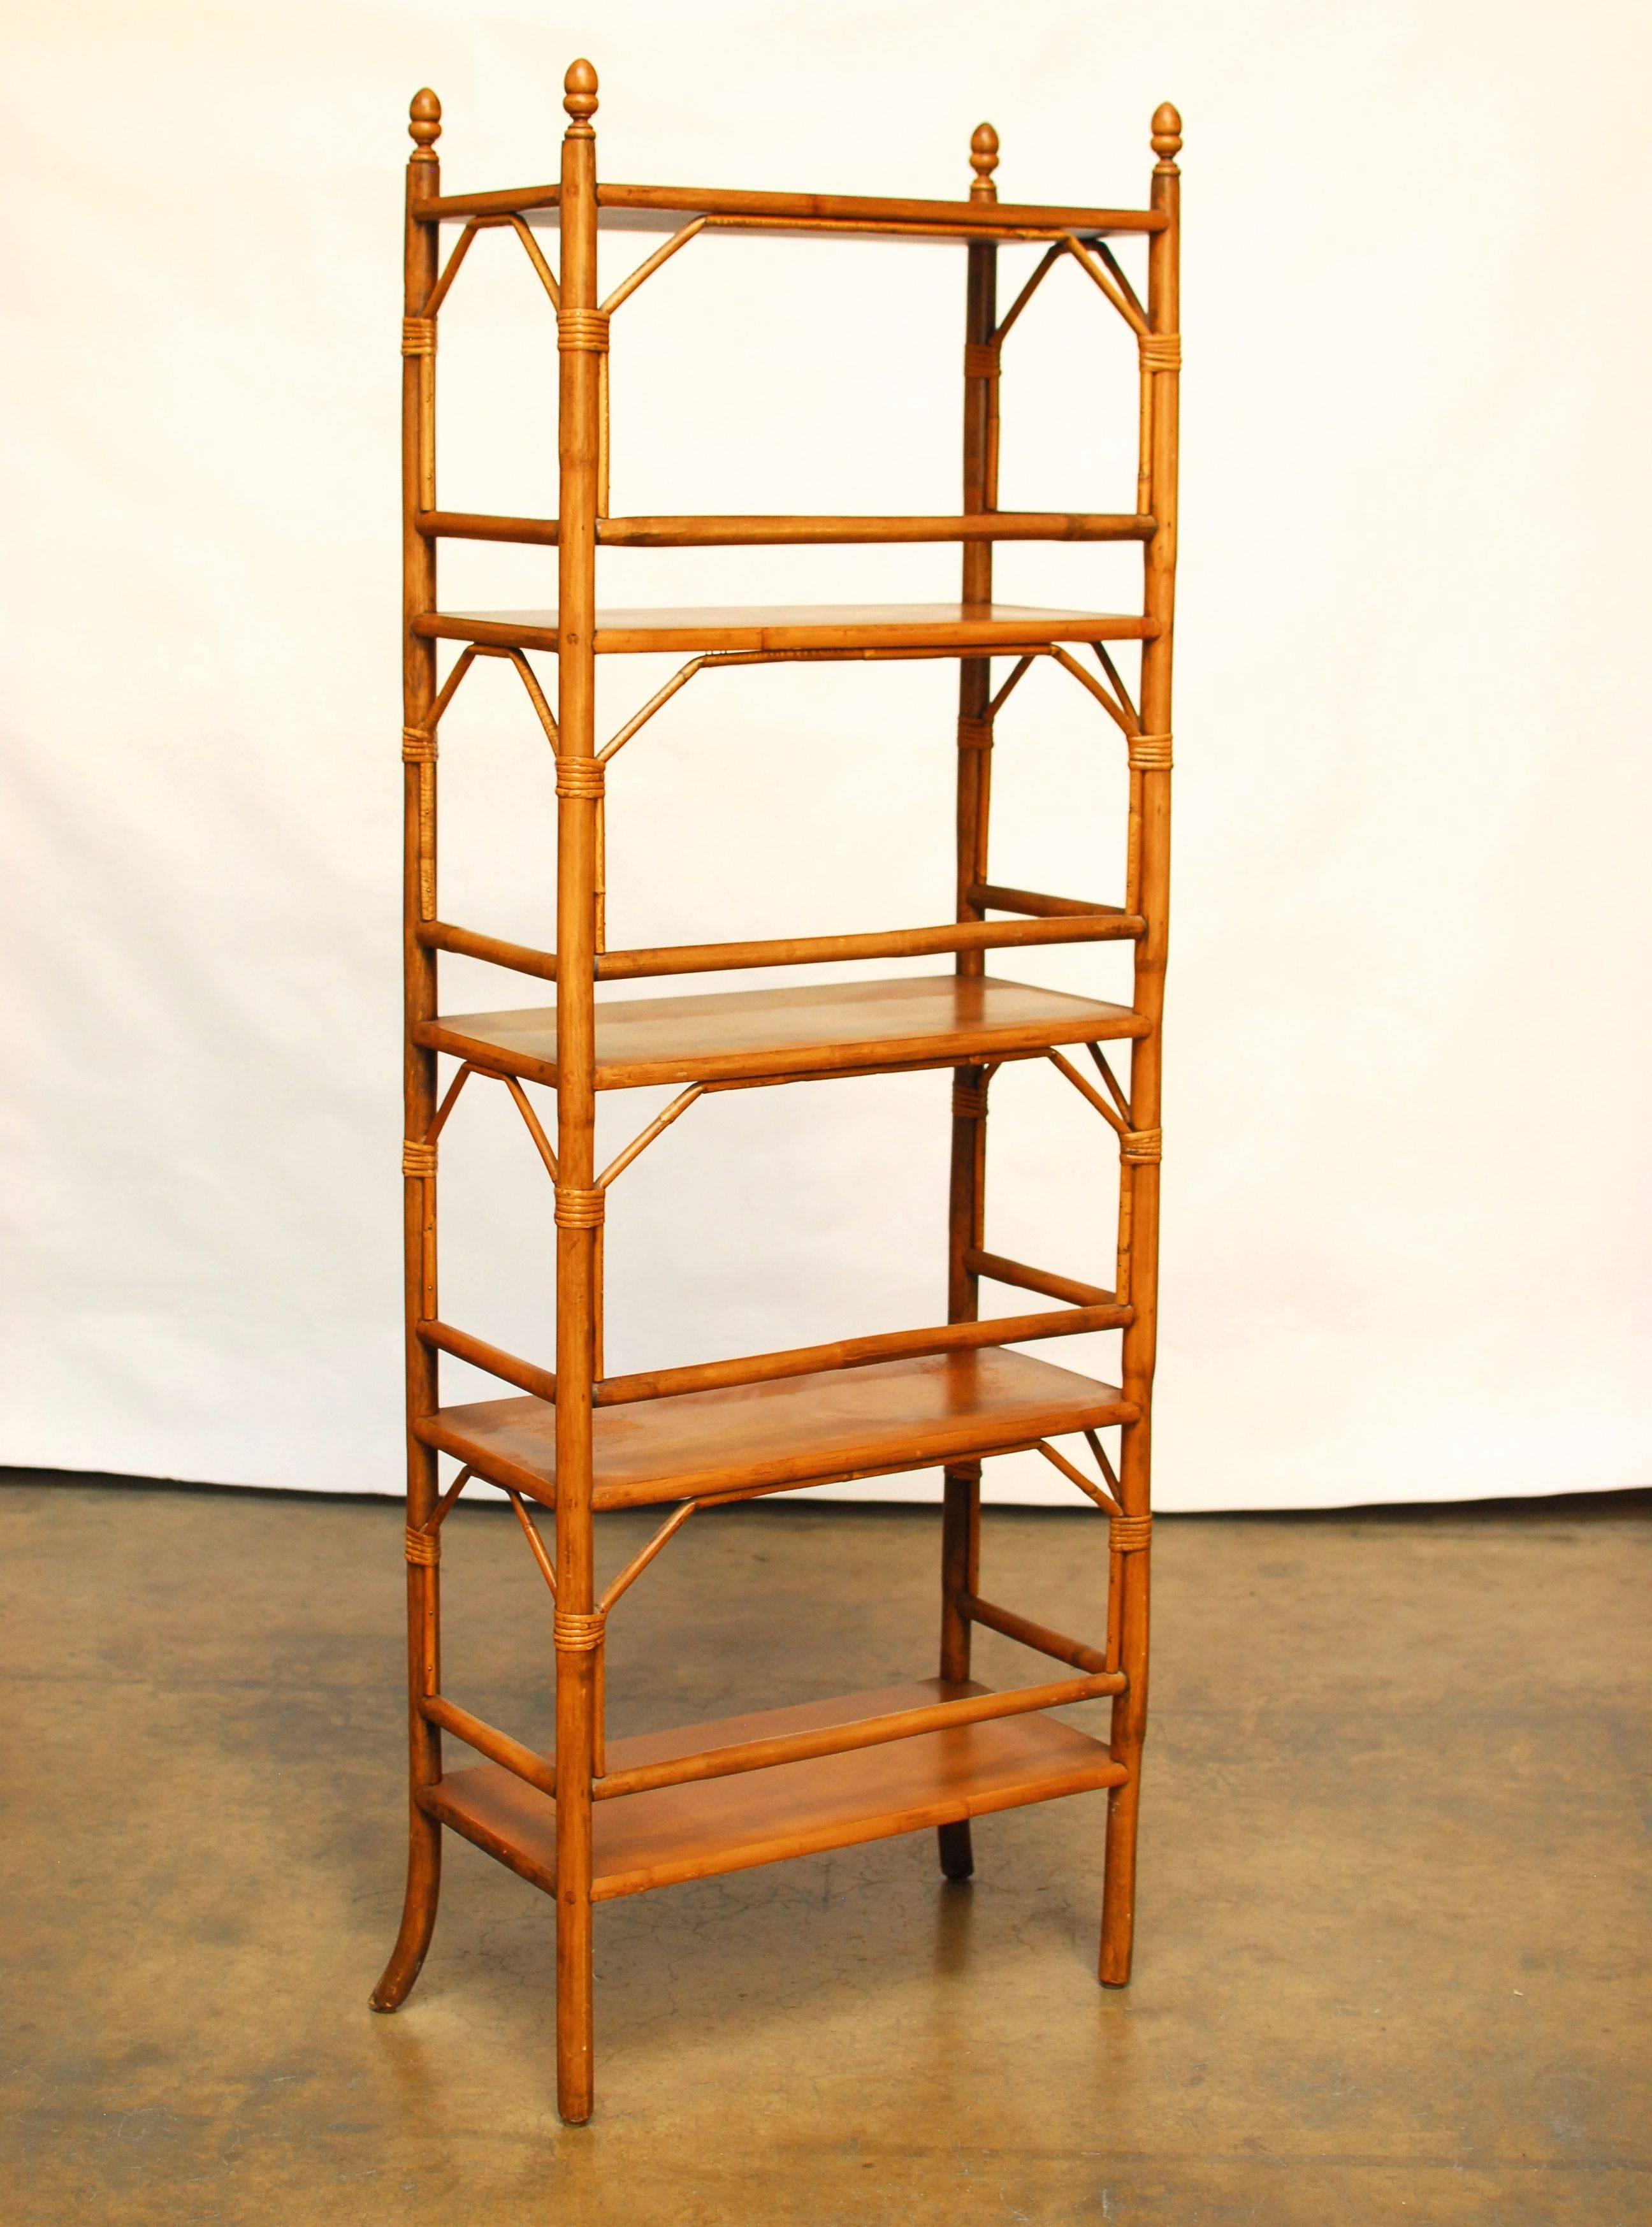 A pair of vintage Hollywood Regency faux bamboo etageres made of carved wood with wood peg joinery and accented with rattan decorative fretwork spandrels and finals. The front legs are splayed on the ends and these etageres feature five display